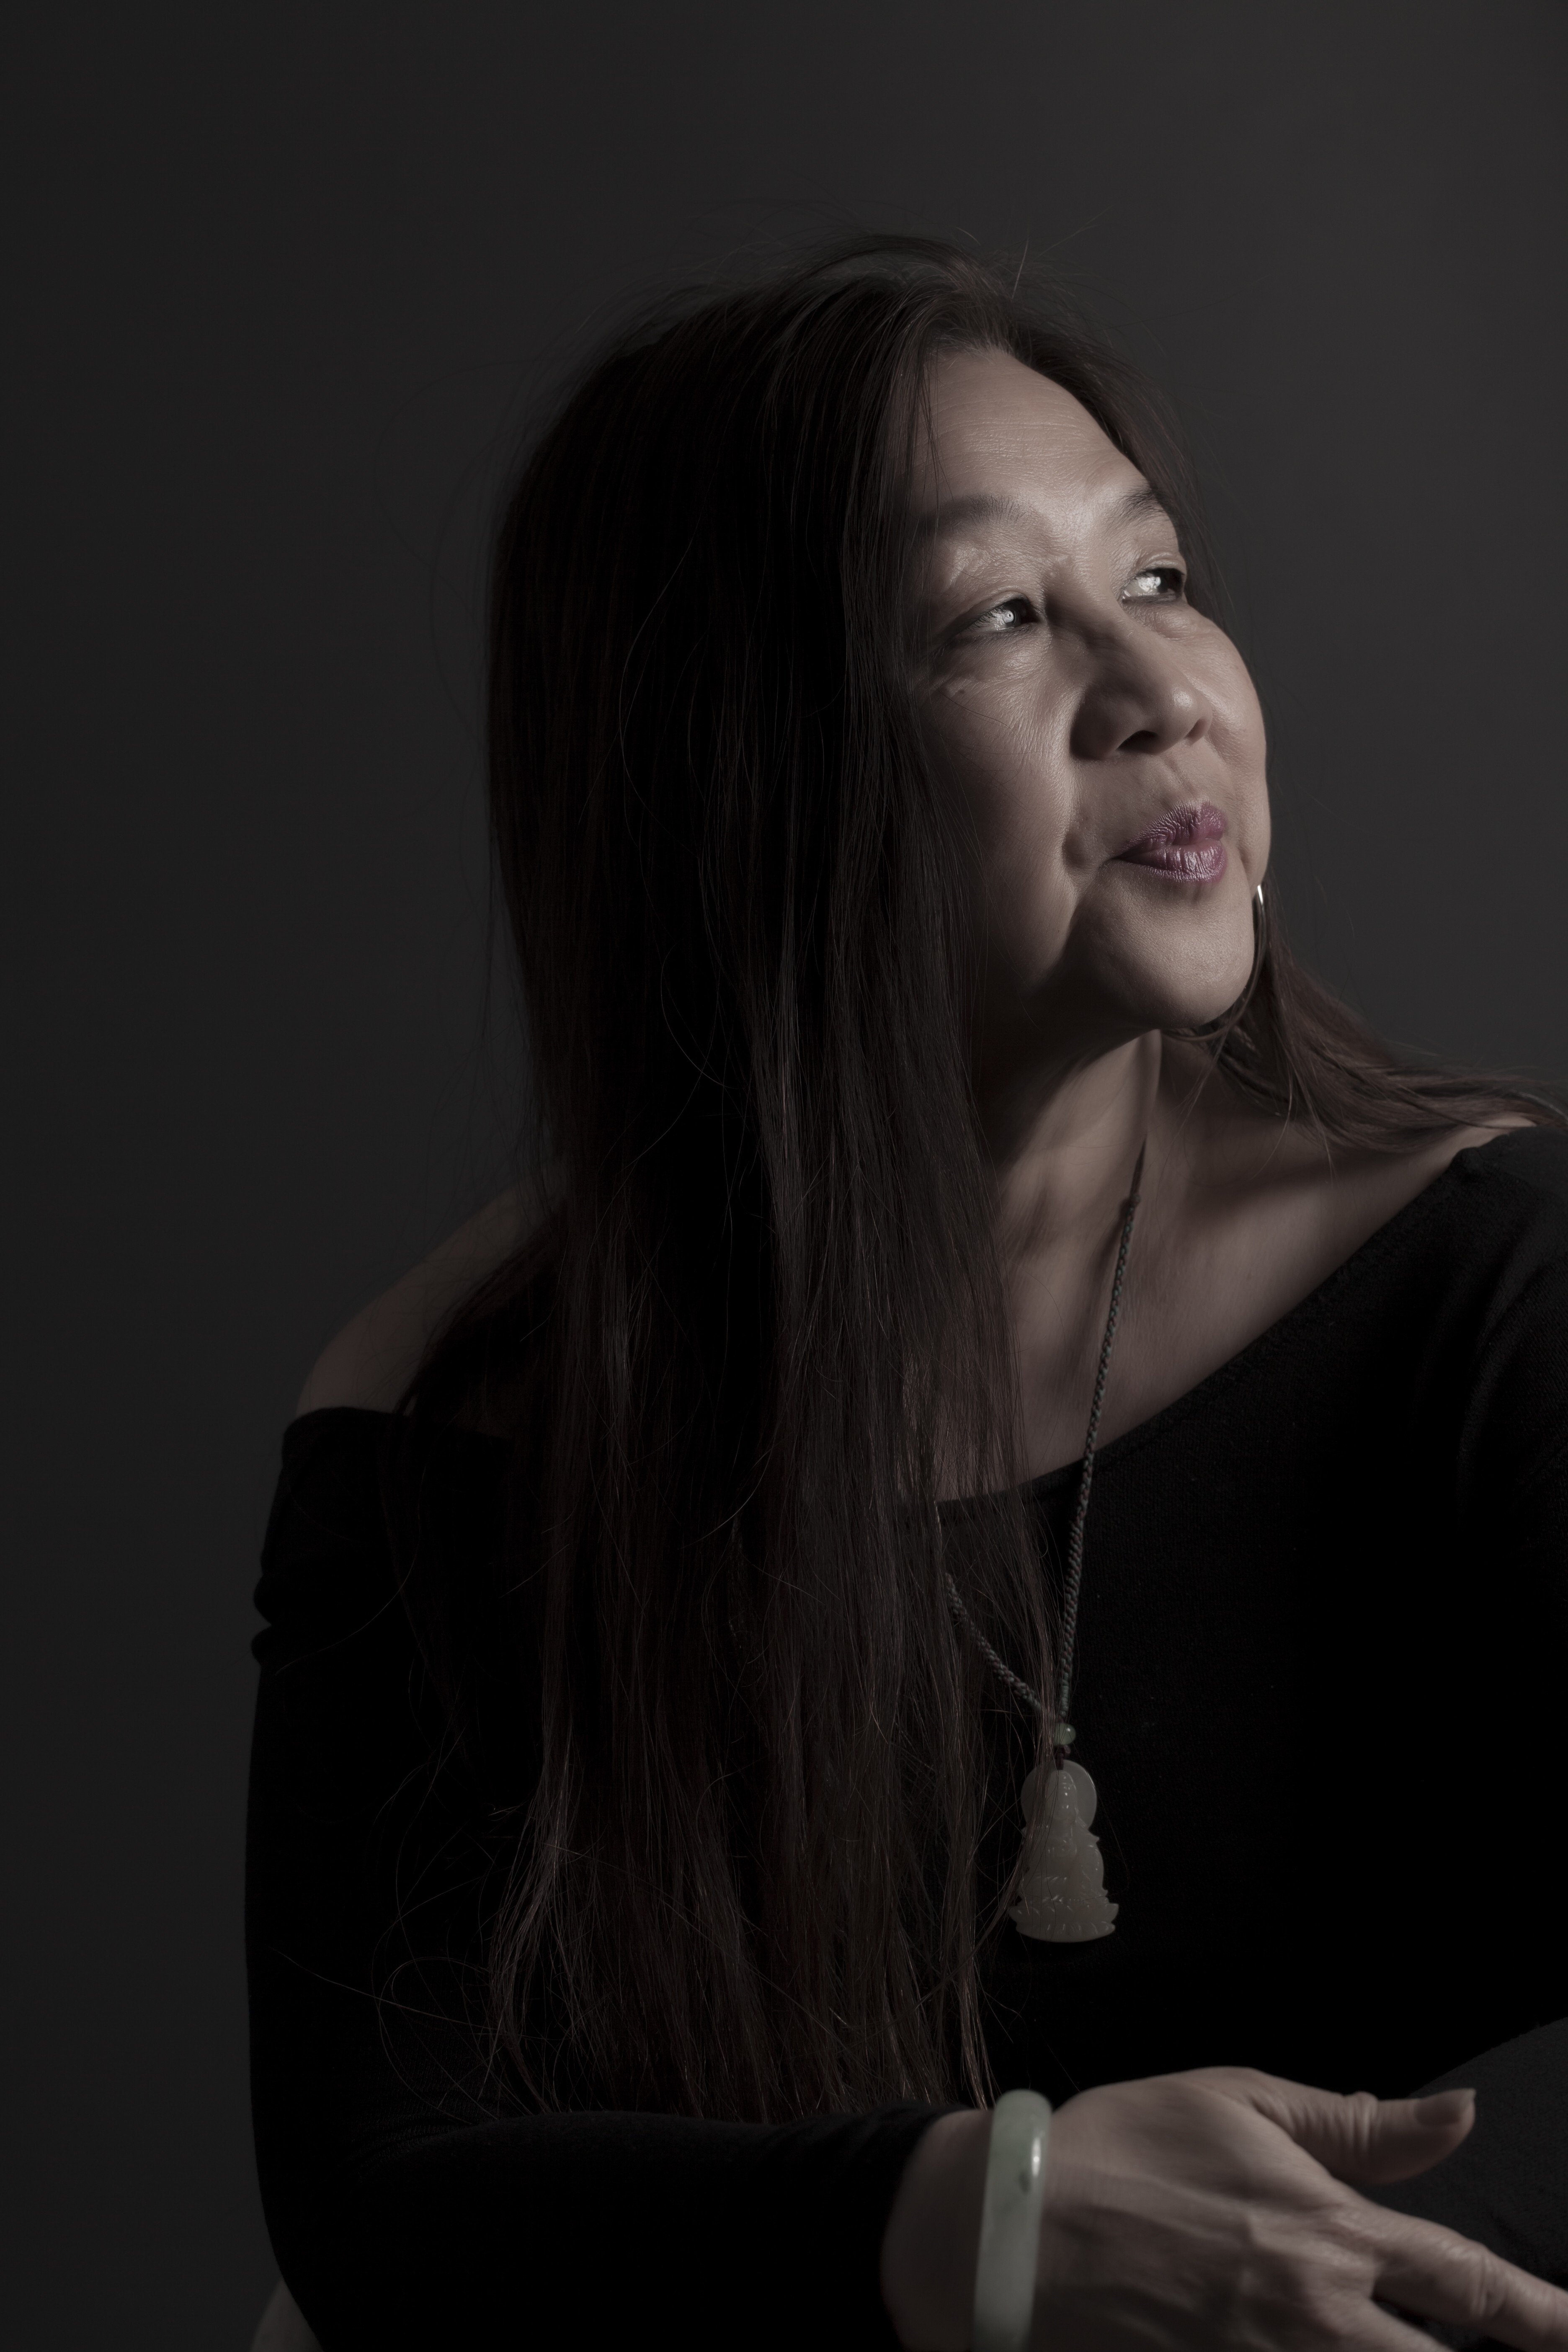 Poet and activist Marilyn Chin. Photo: Handout